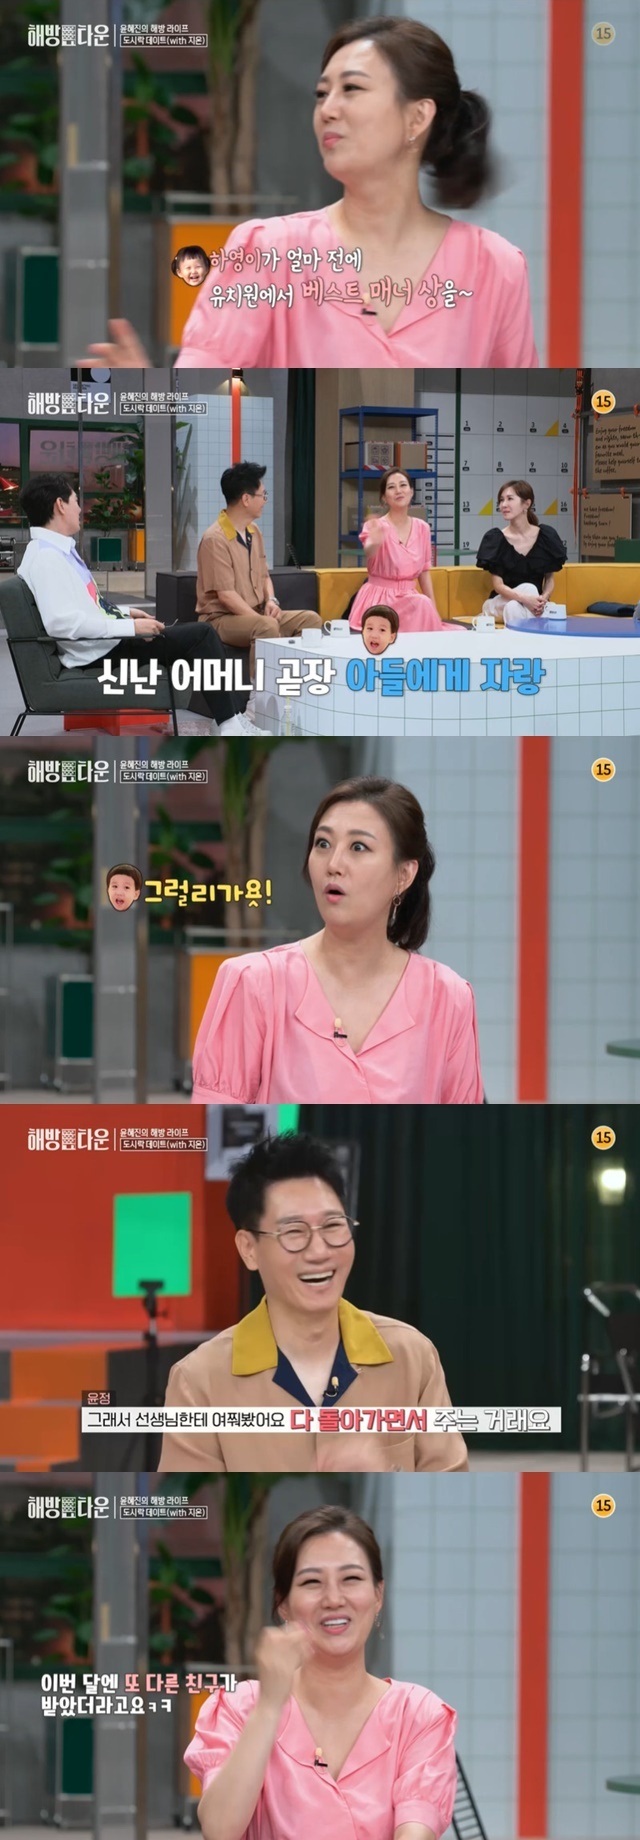 Jang Yun-jeong reported on her daughter Ha-yeongs award for Best Paul Manafort.On July 20th, JTBCs Liberation Town where I Return to Me, Jang Yun-jeong said that her daughter Ha-yeong received the Best Paul Manafort award at Kindergarten.On this day, Yoon Hye-jin made a lunch box for his daughter, Zion, who casts on his legs, and was thrilled with the gold medal of the writing competition that Zion received from the school.Yoon Hye-jin suspected that he had given all the class, but laughed with excitement, saying, My daughter is the first.Jang Yun-jeong, who watched the image, said, I thought of it when I saw it.Ha-yeongi recently received the Best Paul Manafort award at Kindergarten, whats going on here - so thrilled he showed Yeon Woo.When Ha-yeong said he had won the Best Paul Manafort award, Yeon Woo said, Why not? he said.